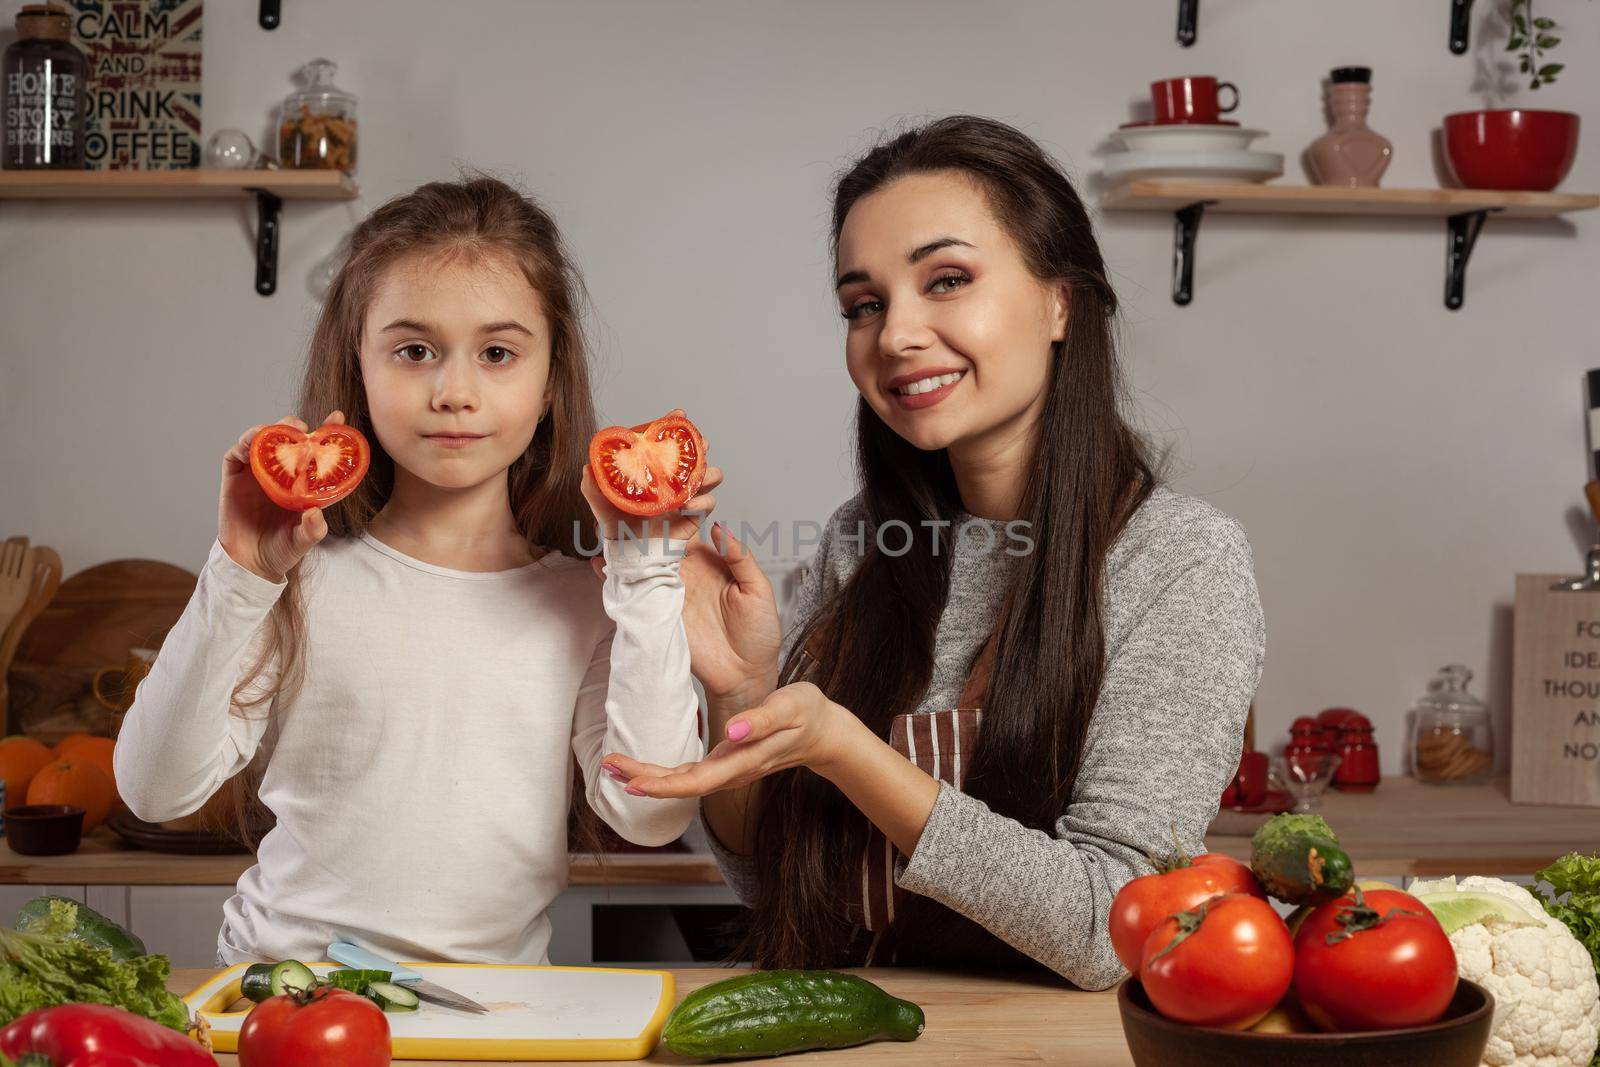 Happy loving family are cooking together. Pretty mom and her kid are making a vegetable salad and posing with tomato at the kitchen, against a white wall with shelves and bulbs on it. Homemade food and little helper.